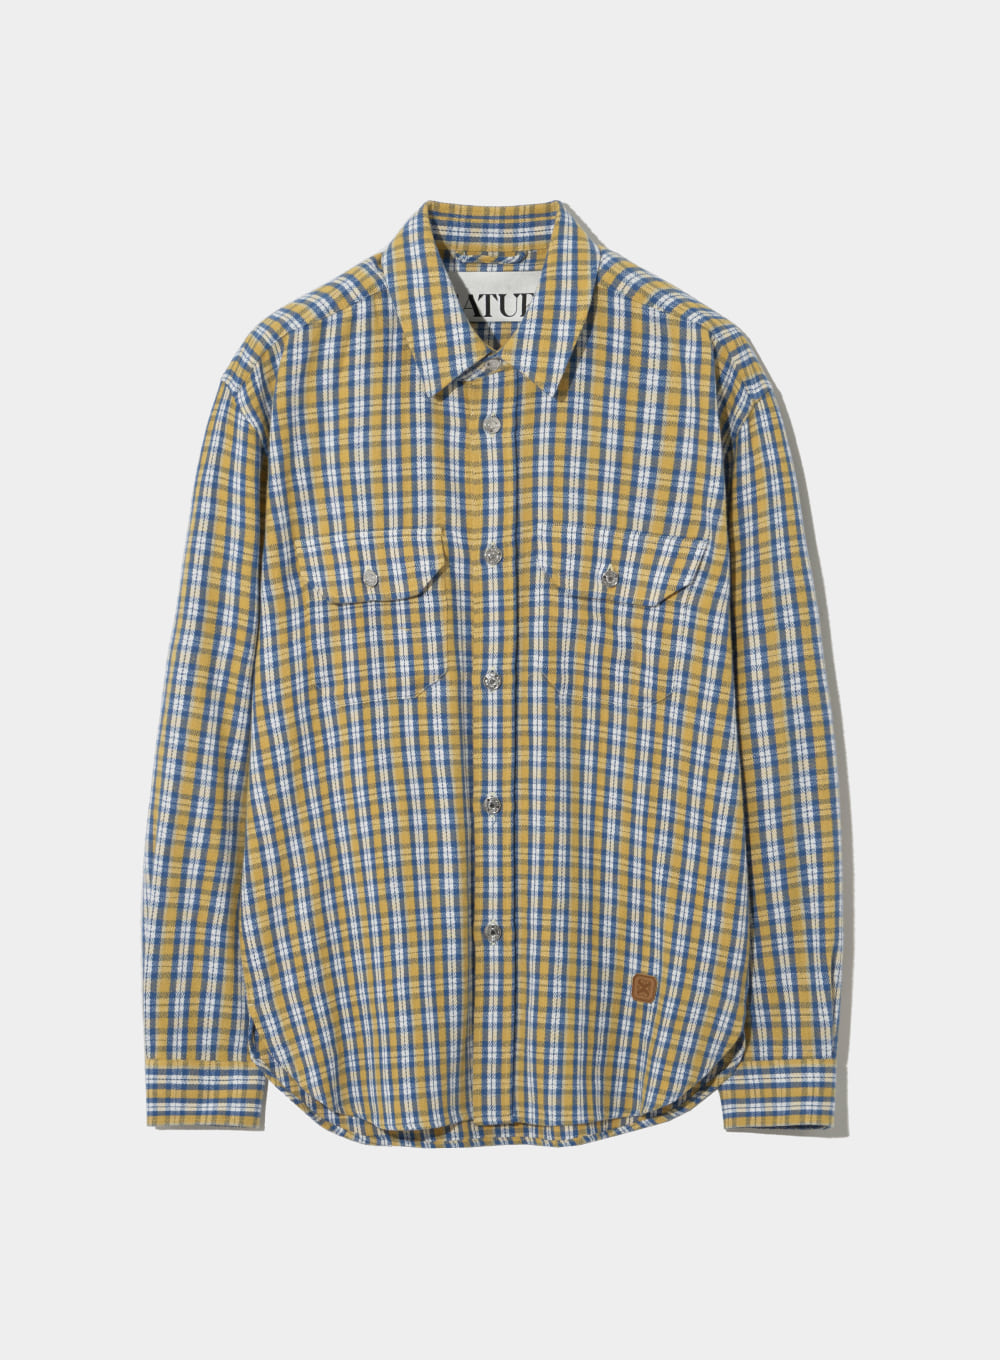 Double Pocket Flannel Check Shirts - Mustard Yellow